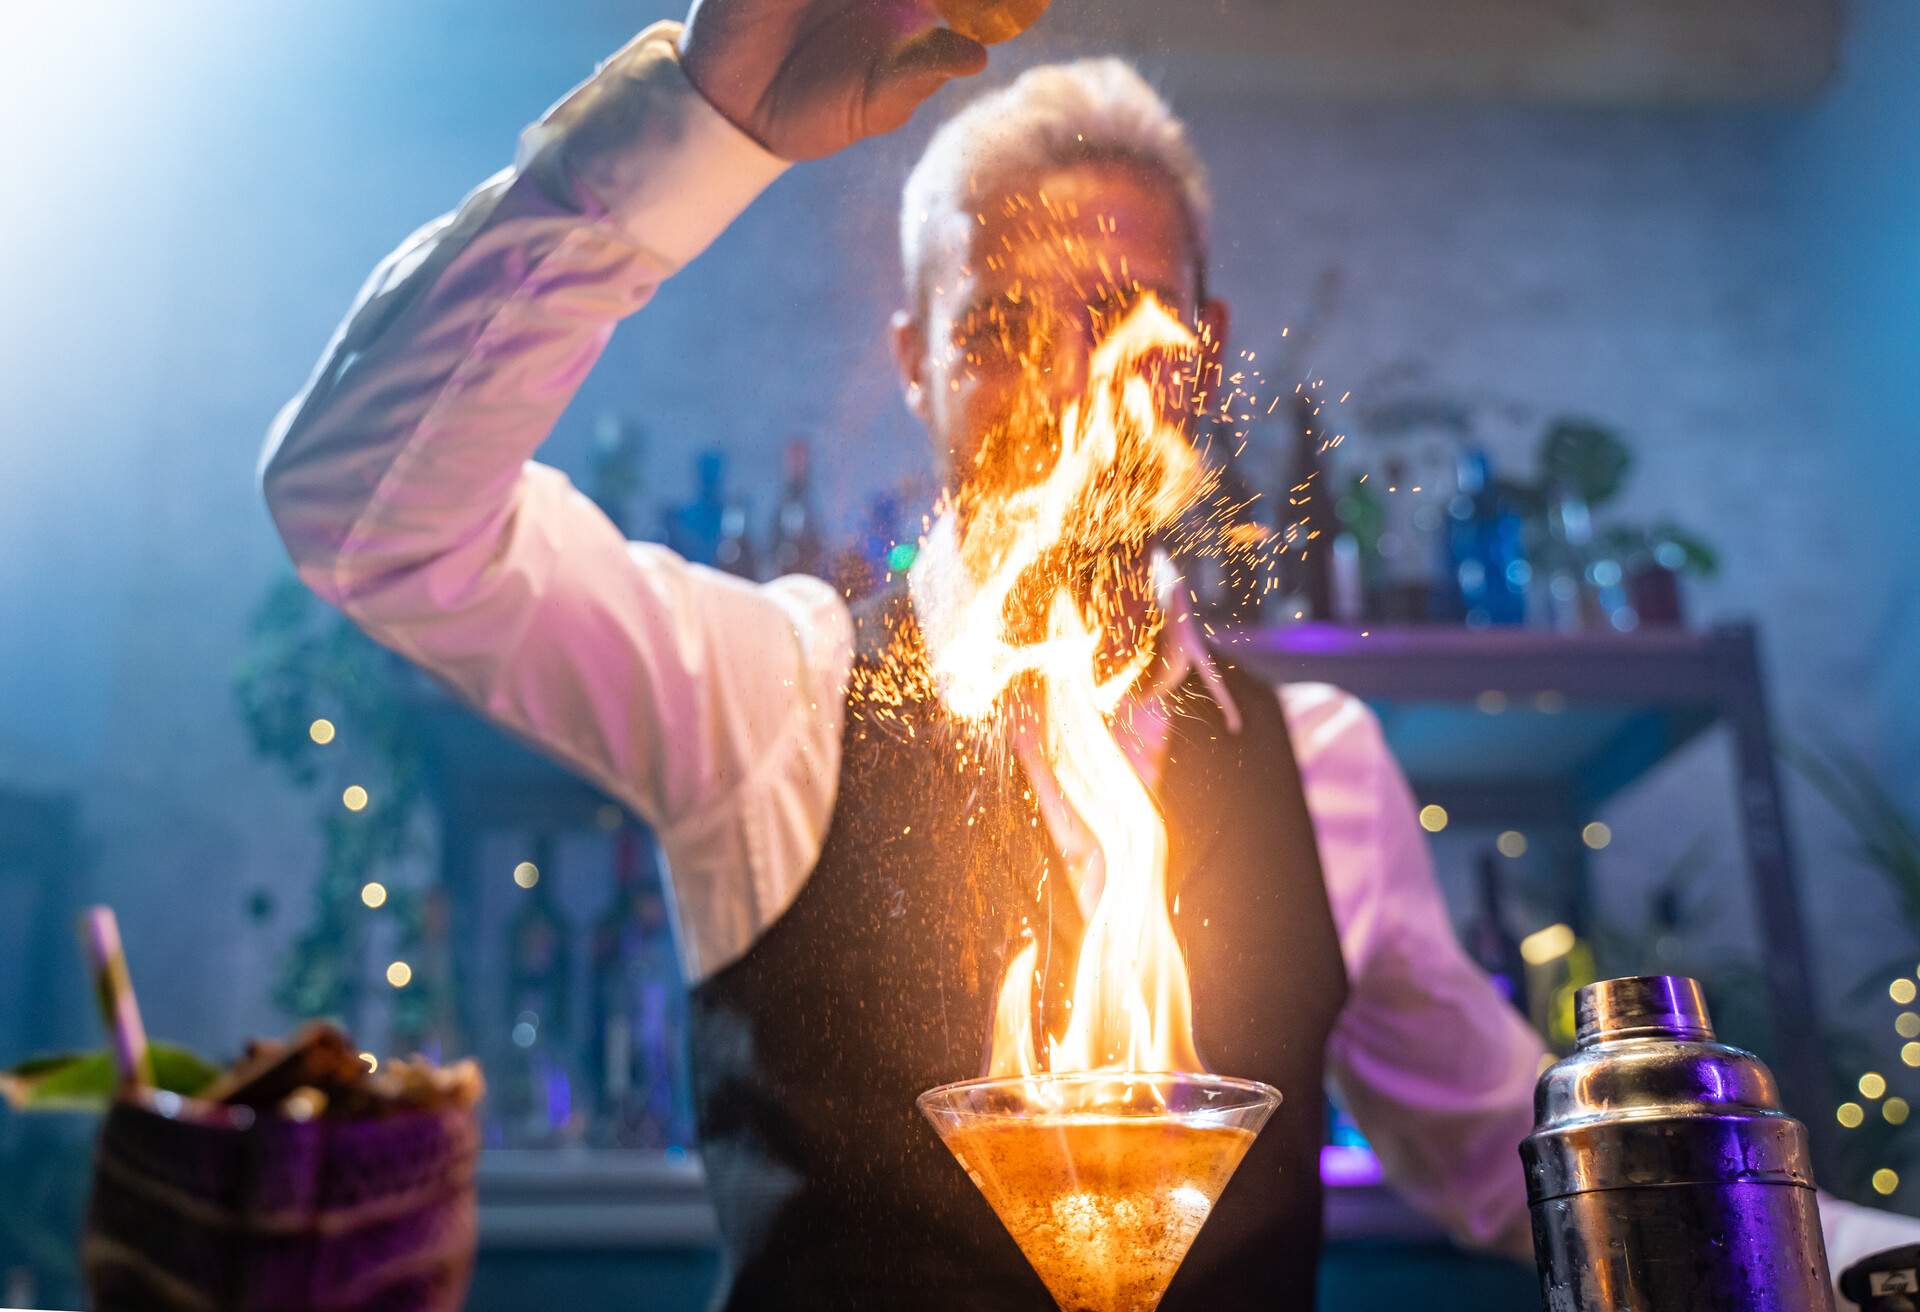 A burning cocktail drink in front of bartender.